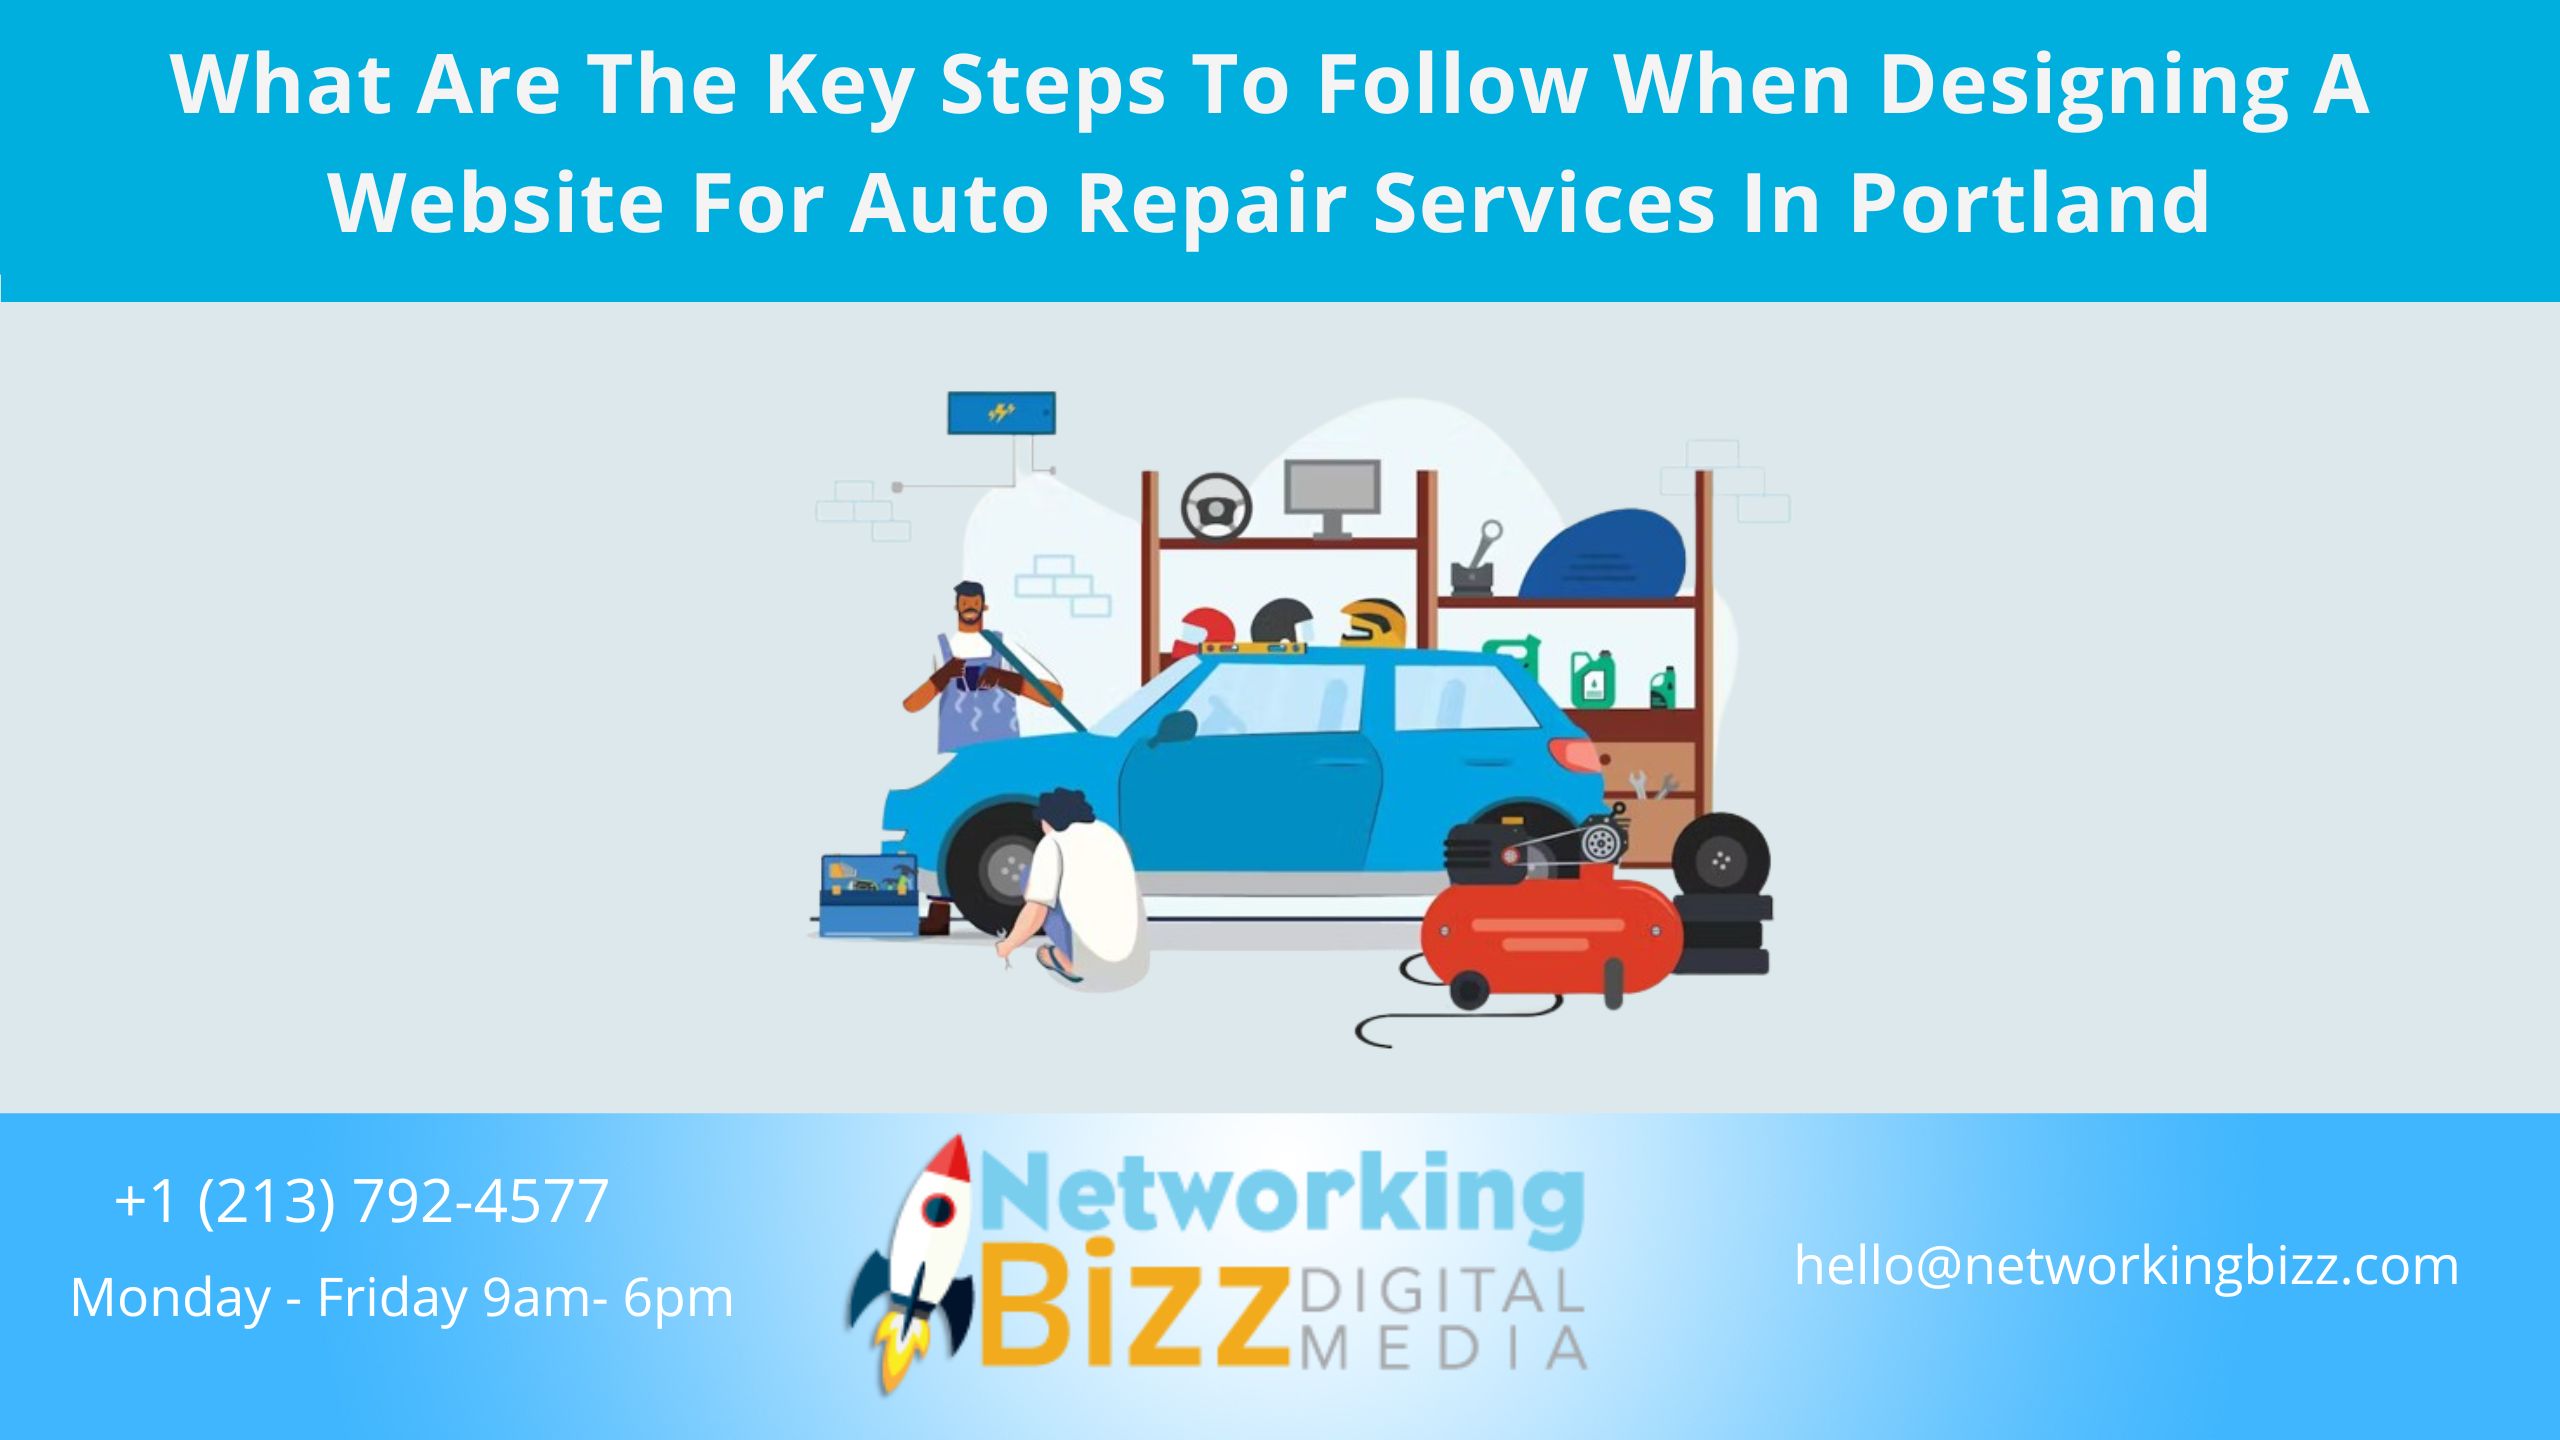 What Are The Key Steps To Follow When Designing A Website For Auto Repair Services In Portland